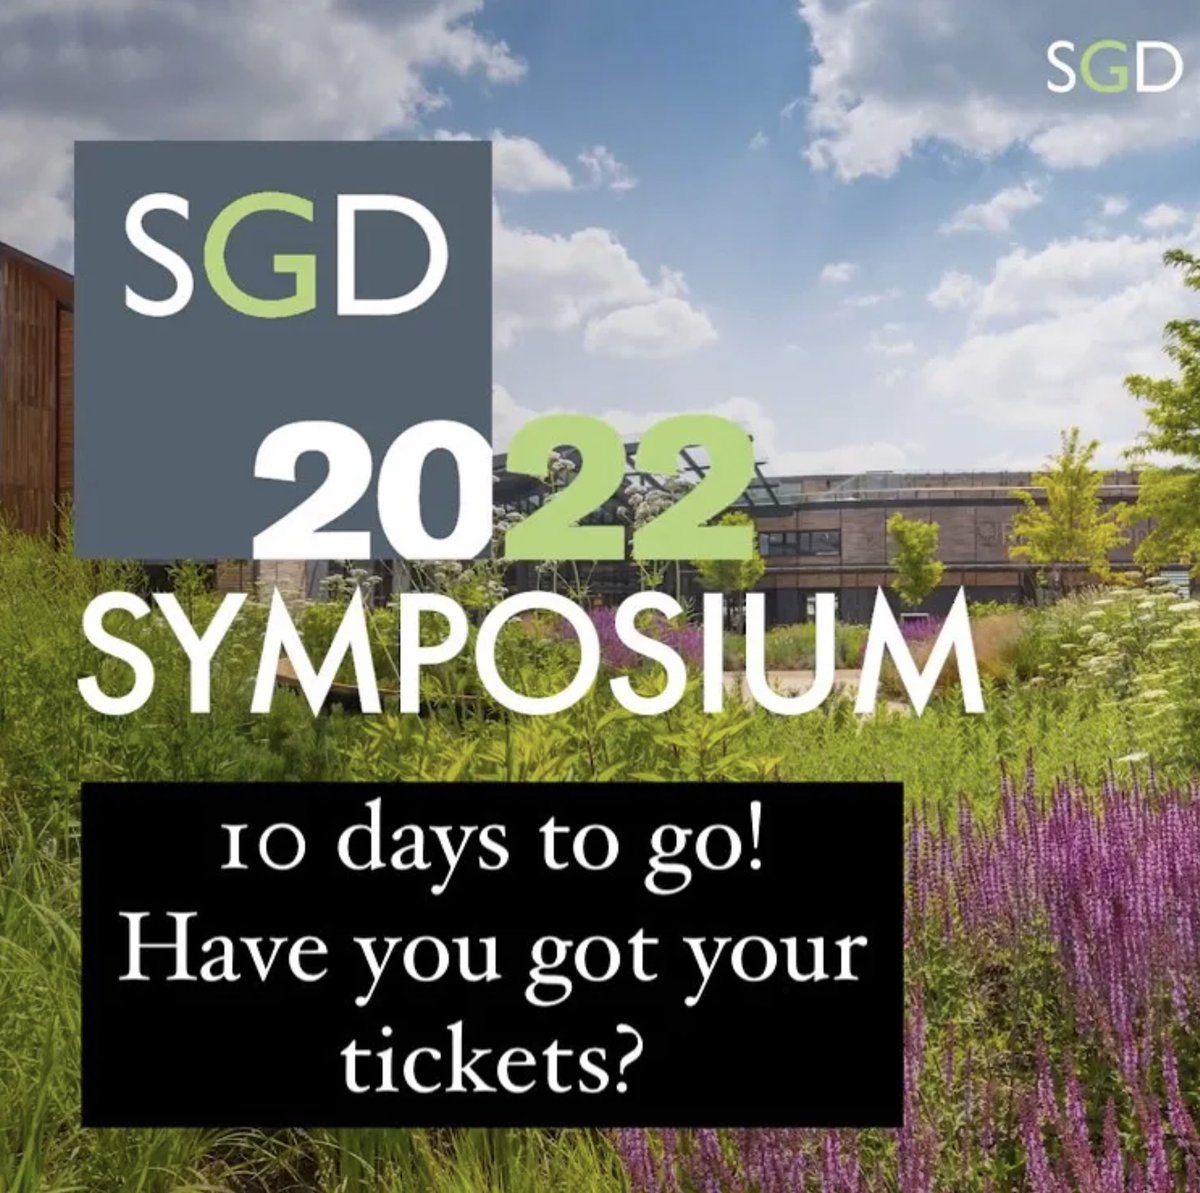 *Two inspiring days *15 world-class speakers *6 headline talks + panel debates and roundtable discussions *Excellent networking opportunities *Summer garden party in glorious @RHSWisley *One-day, two-day, or livestream ticket options available sgd.org.uk/events/symposi…